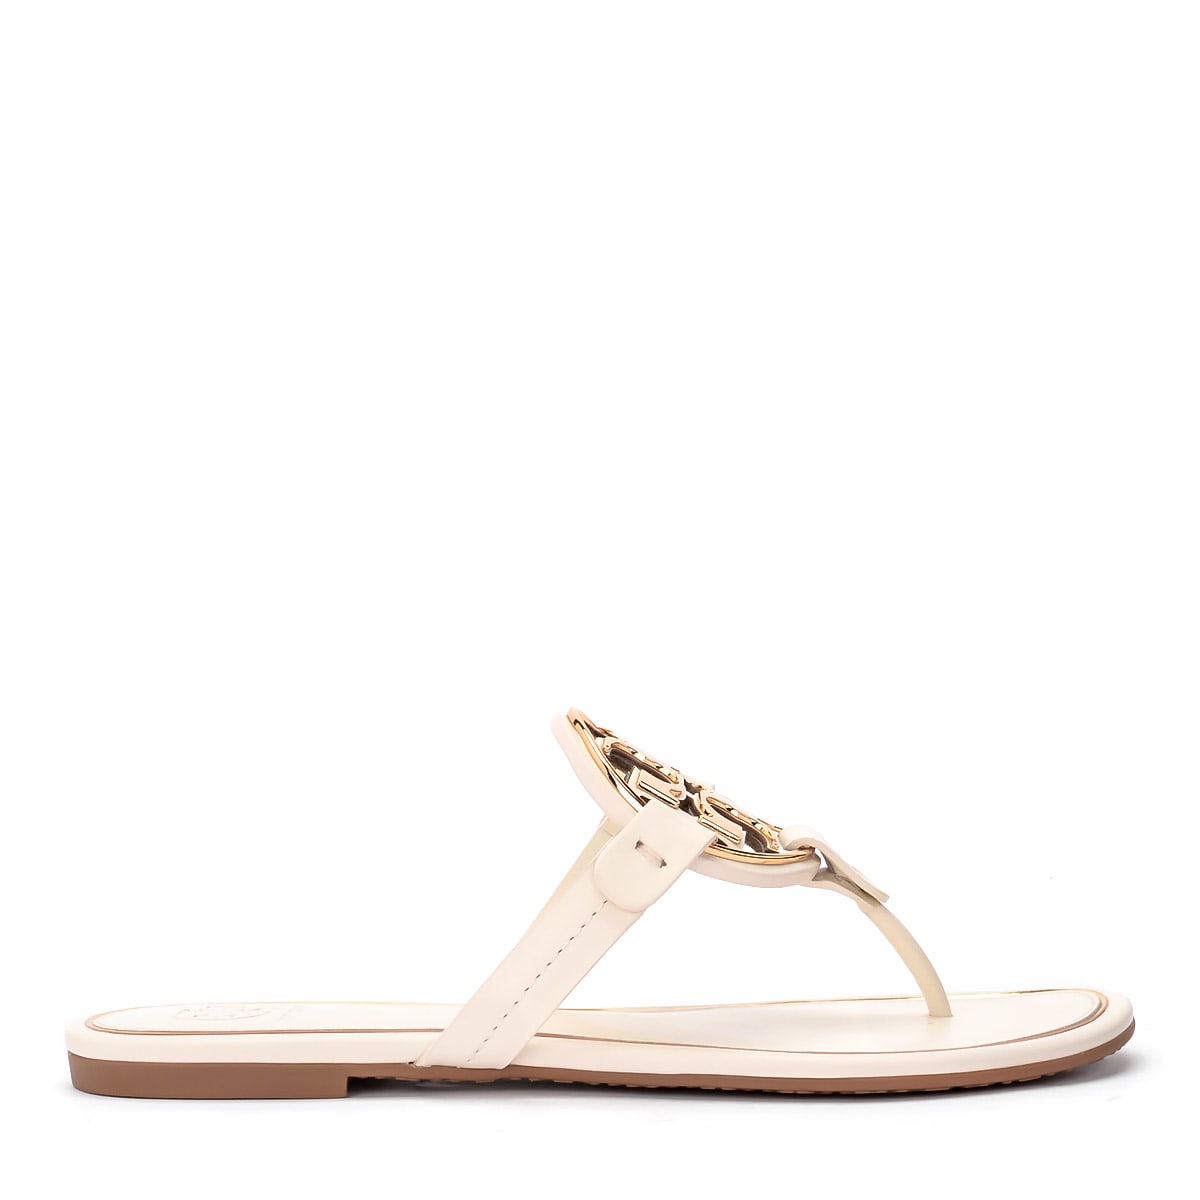 Tory Burch Miller White Leather Sandal